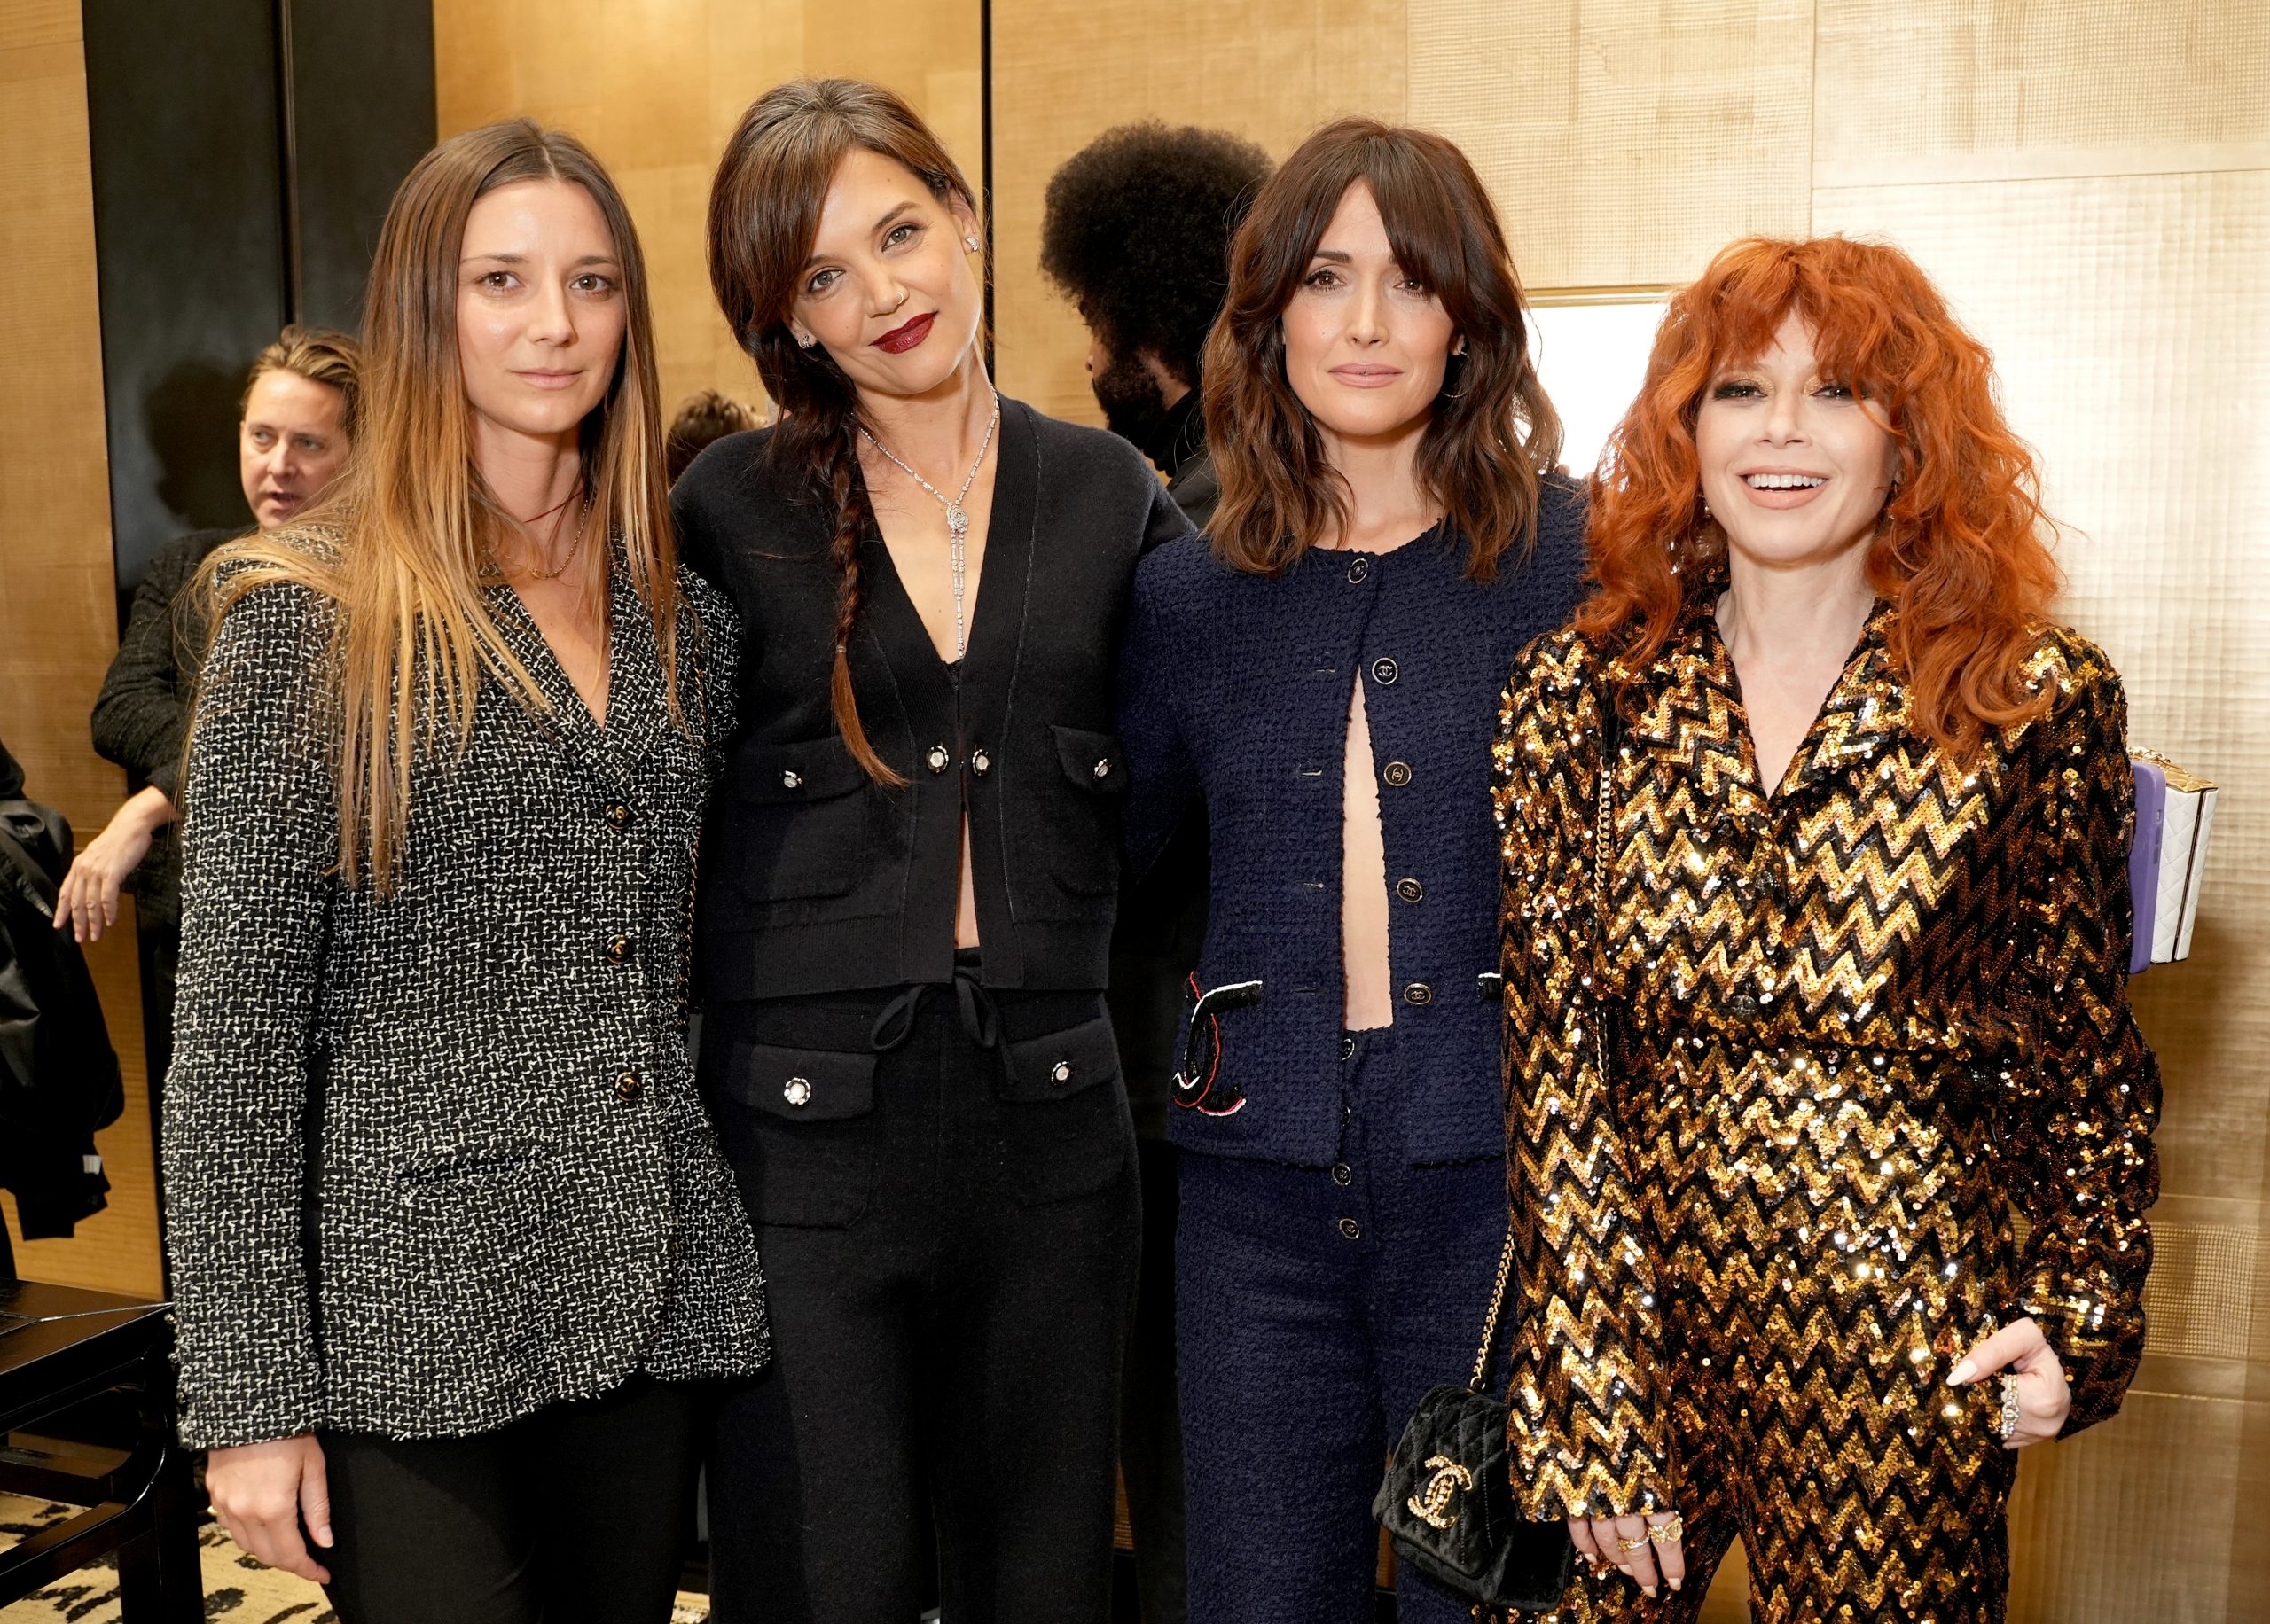 NEW YORK, NEW YORK - FEBRUARY 07: (L-R) Brie Welch, Katie Holmes, Rose Byrne, and Natasha Lyonne attend the CHANEL cocktail to celebrate the Watches & Fine Jewelry Fifth Avenue Flagship Boutique Opening on February 07, 2024 in New York City. (Photo by Sean Zanni/WireImage)